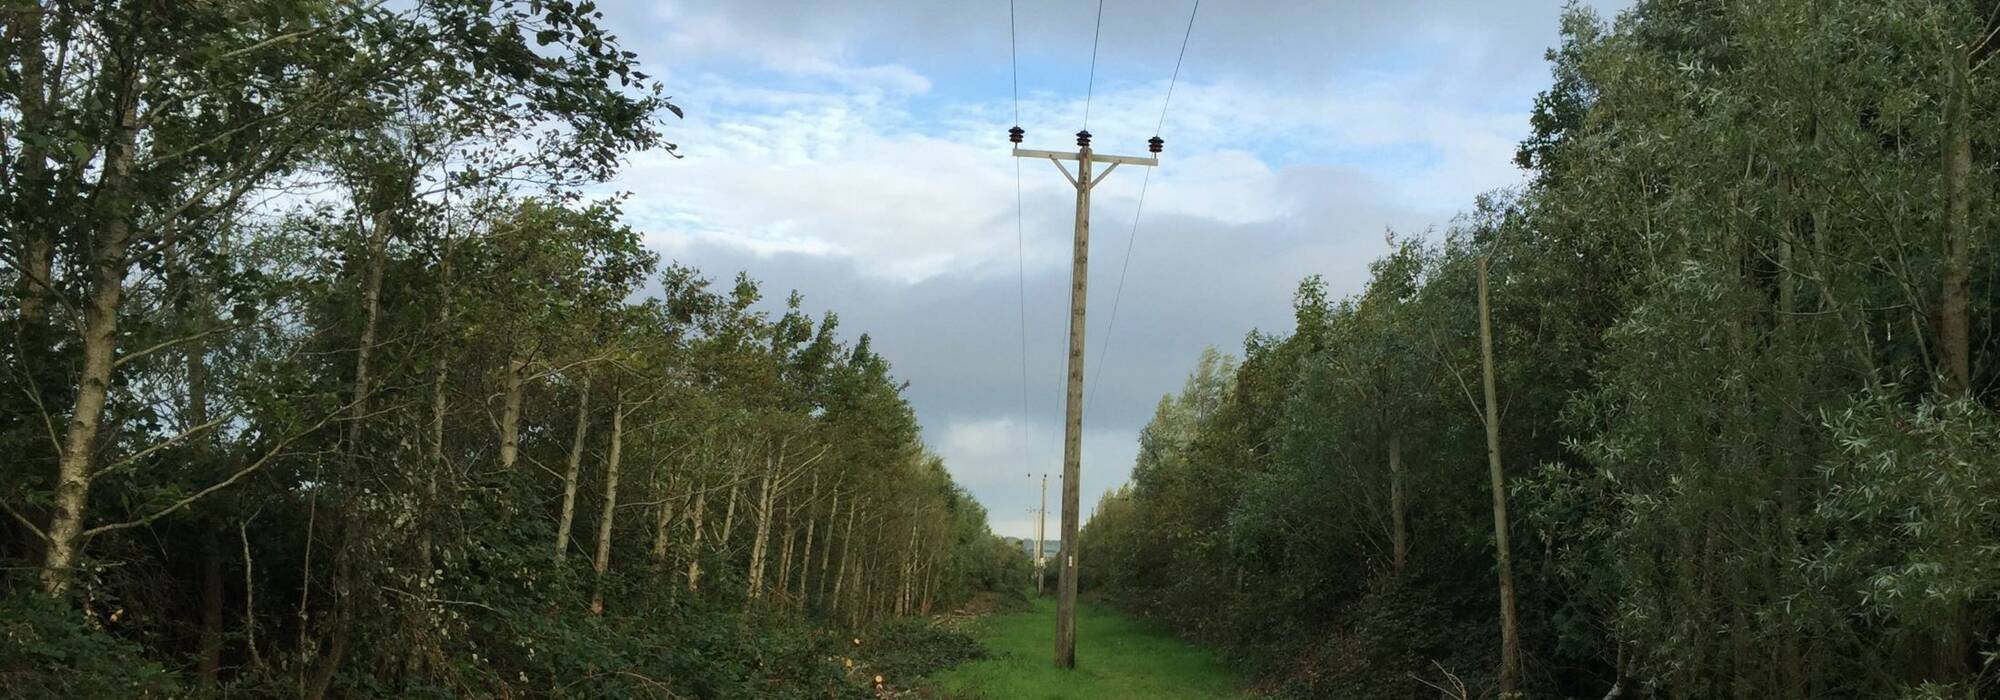 Forestry Valuation & Consents For Tree Cutting For Resilience Of Existing 33KV Overhead Line